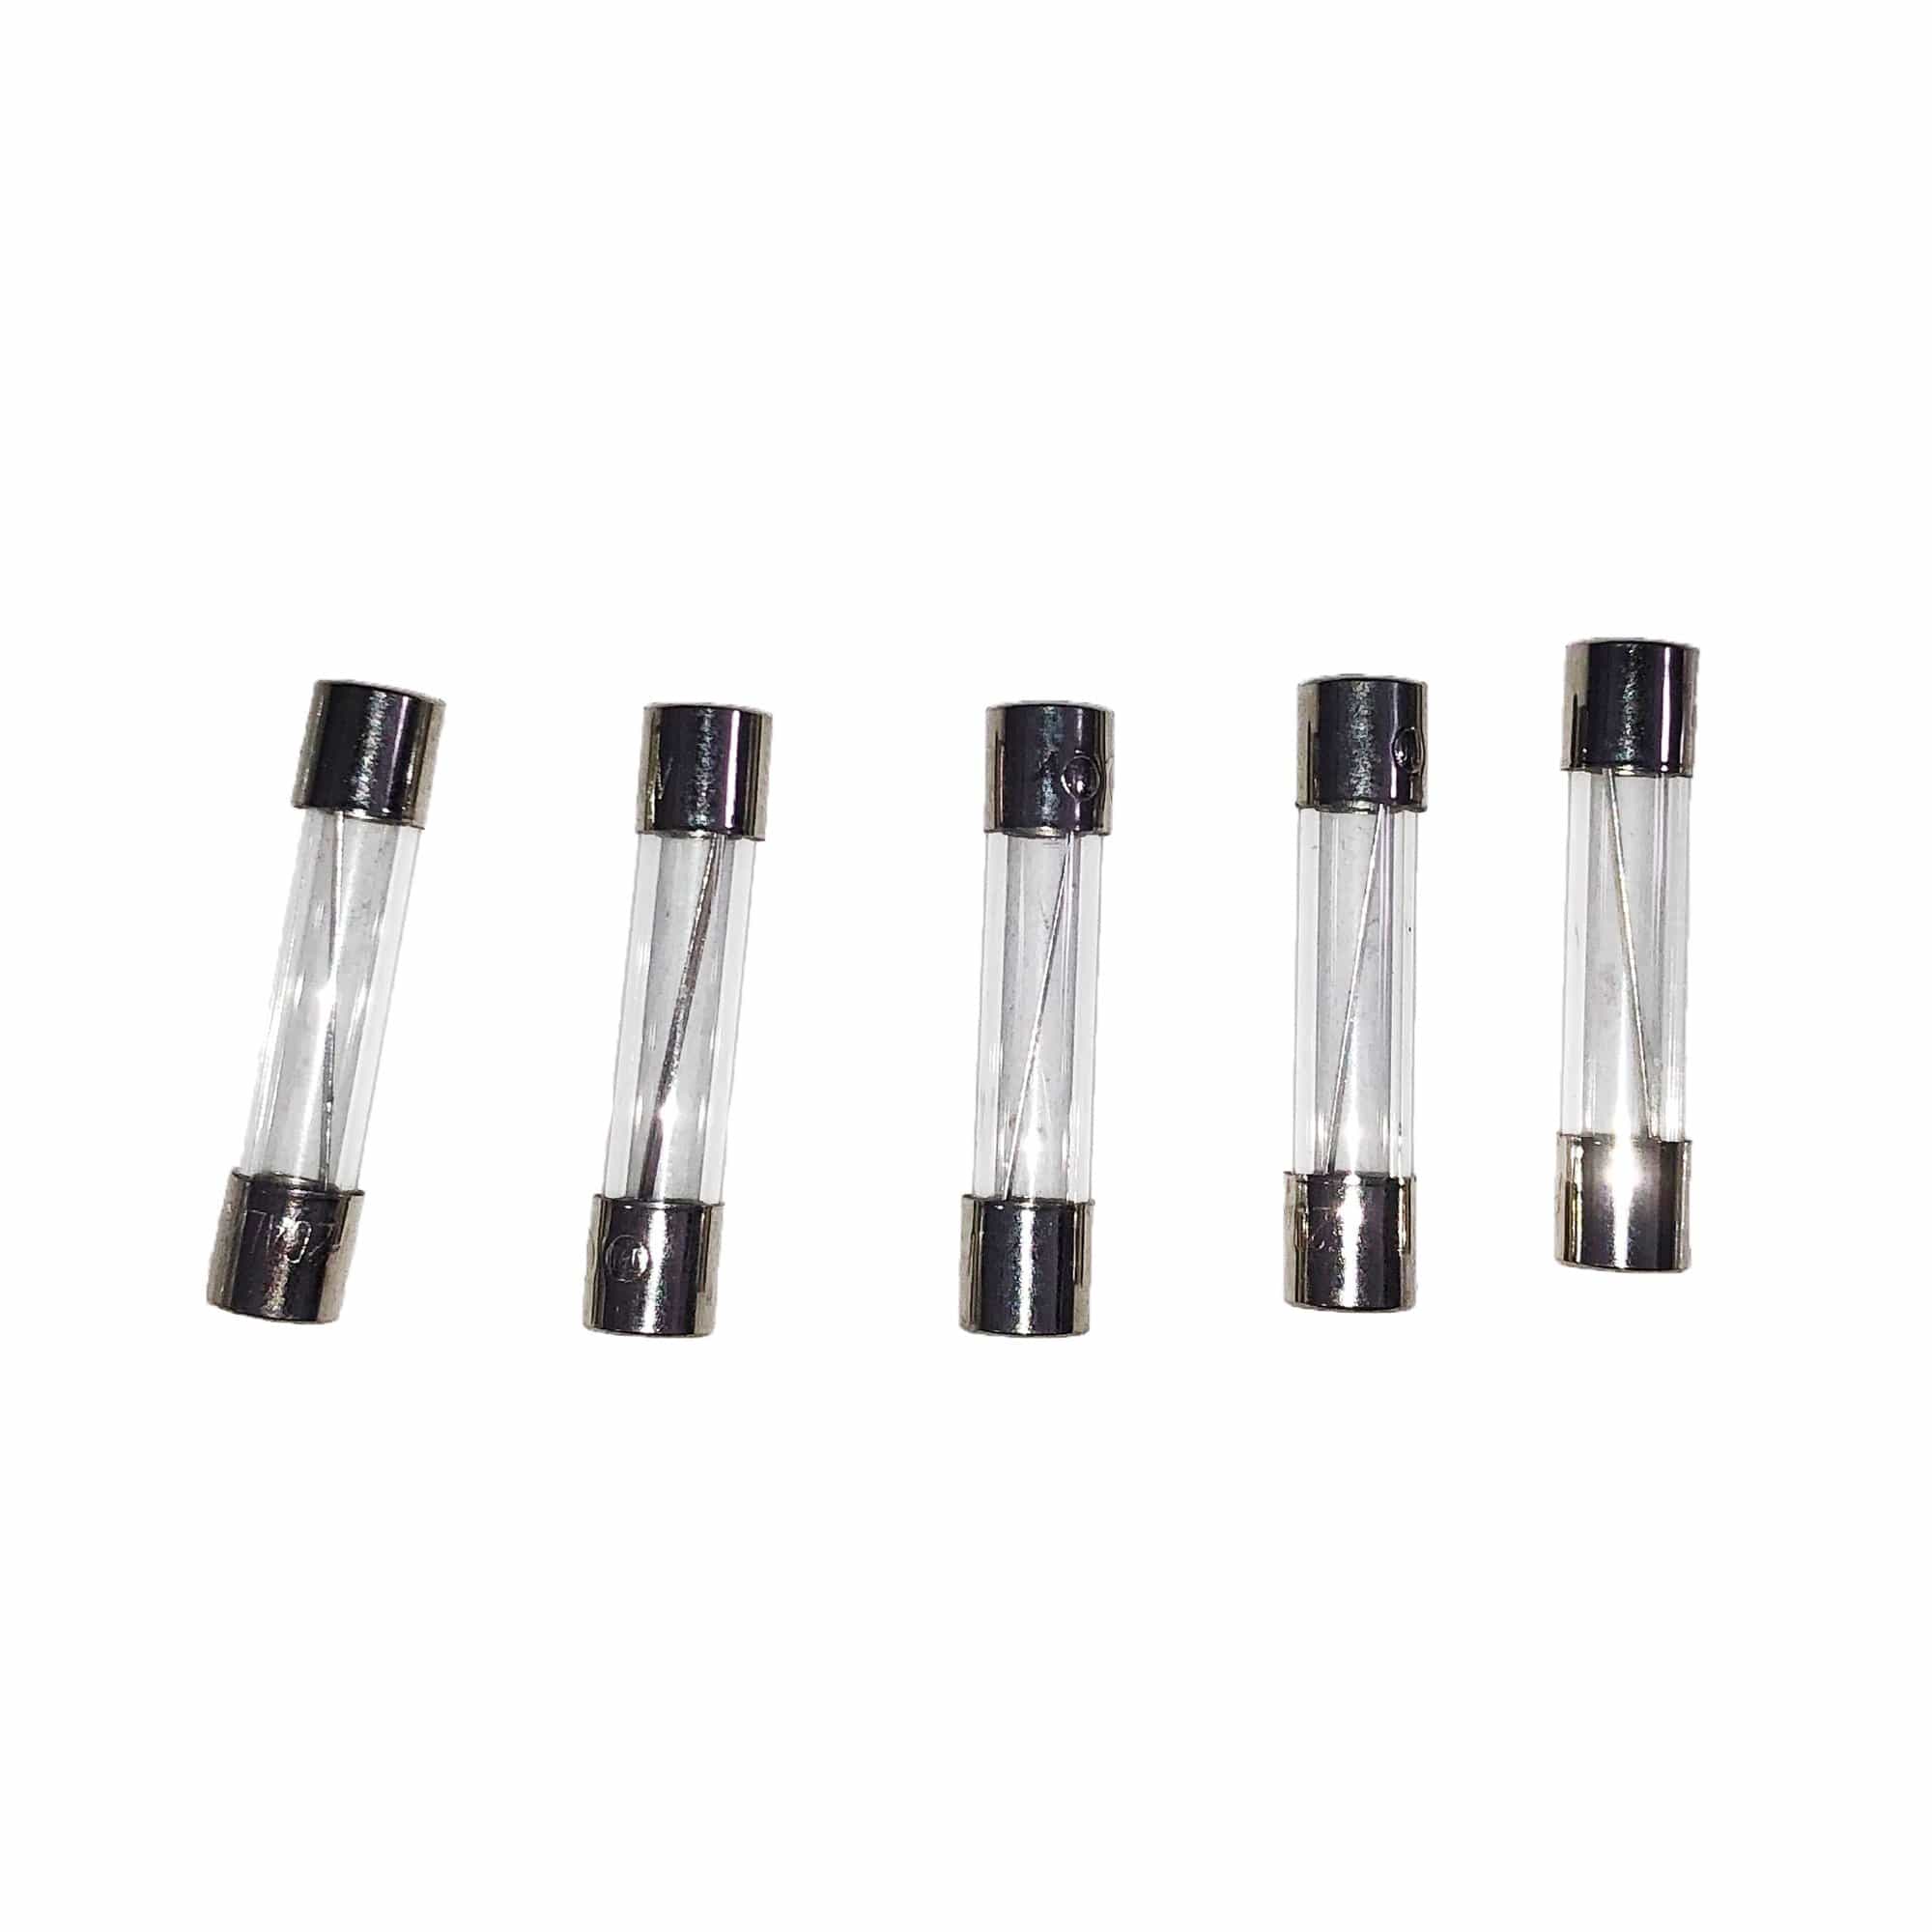 PowerBright F5A 5 Amp Glass Fuse 5 Pack